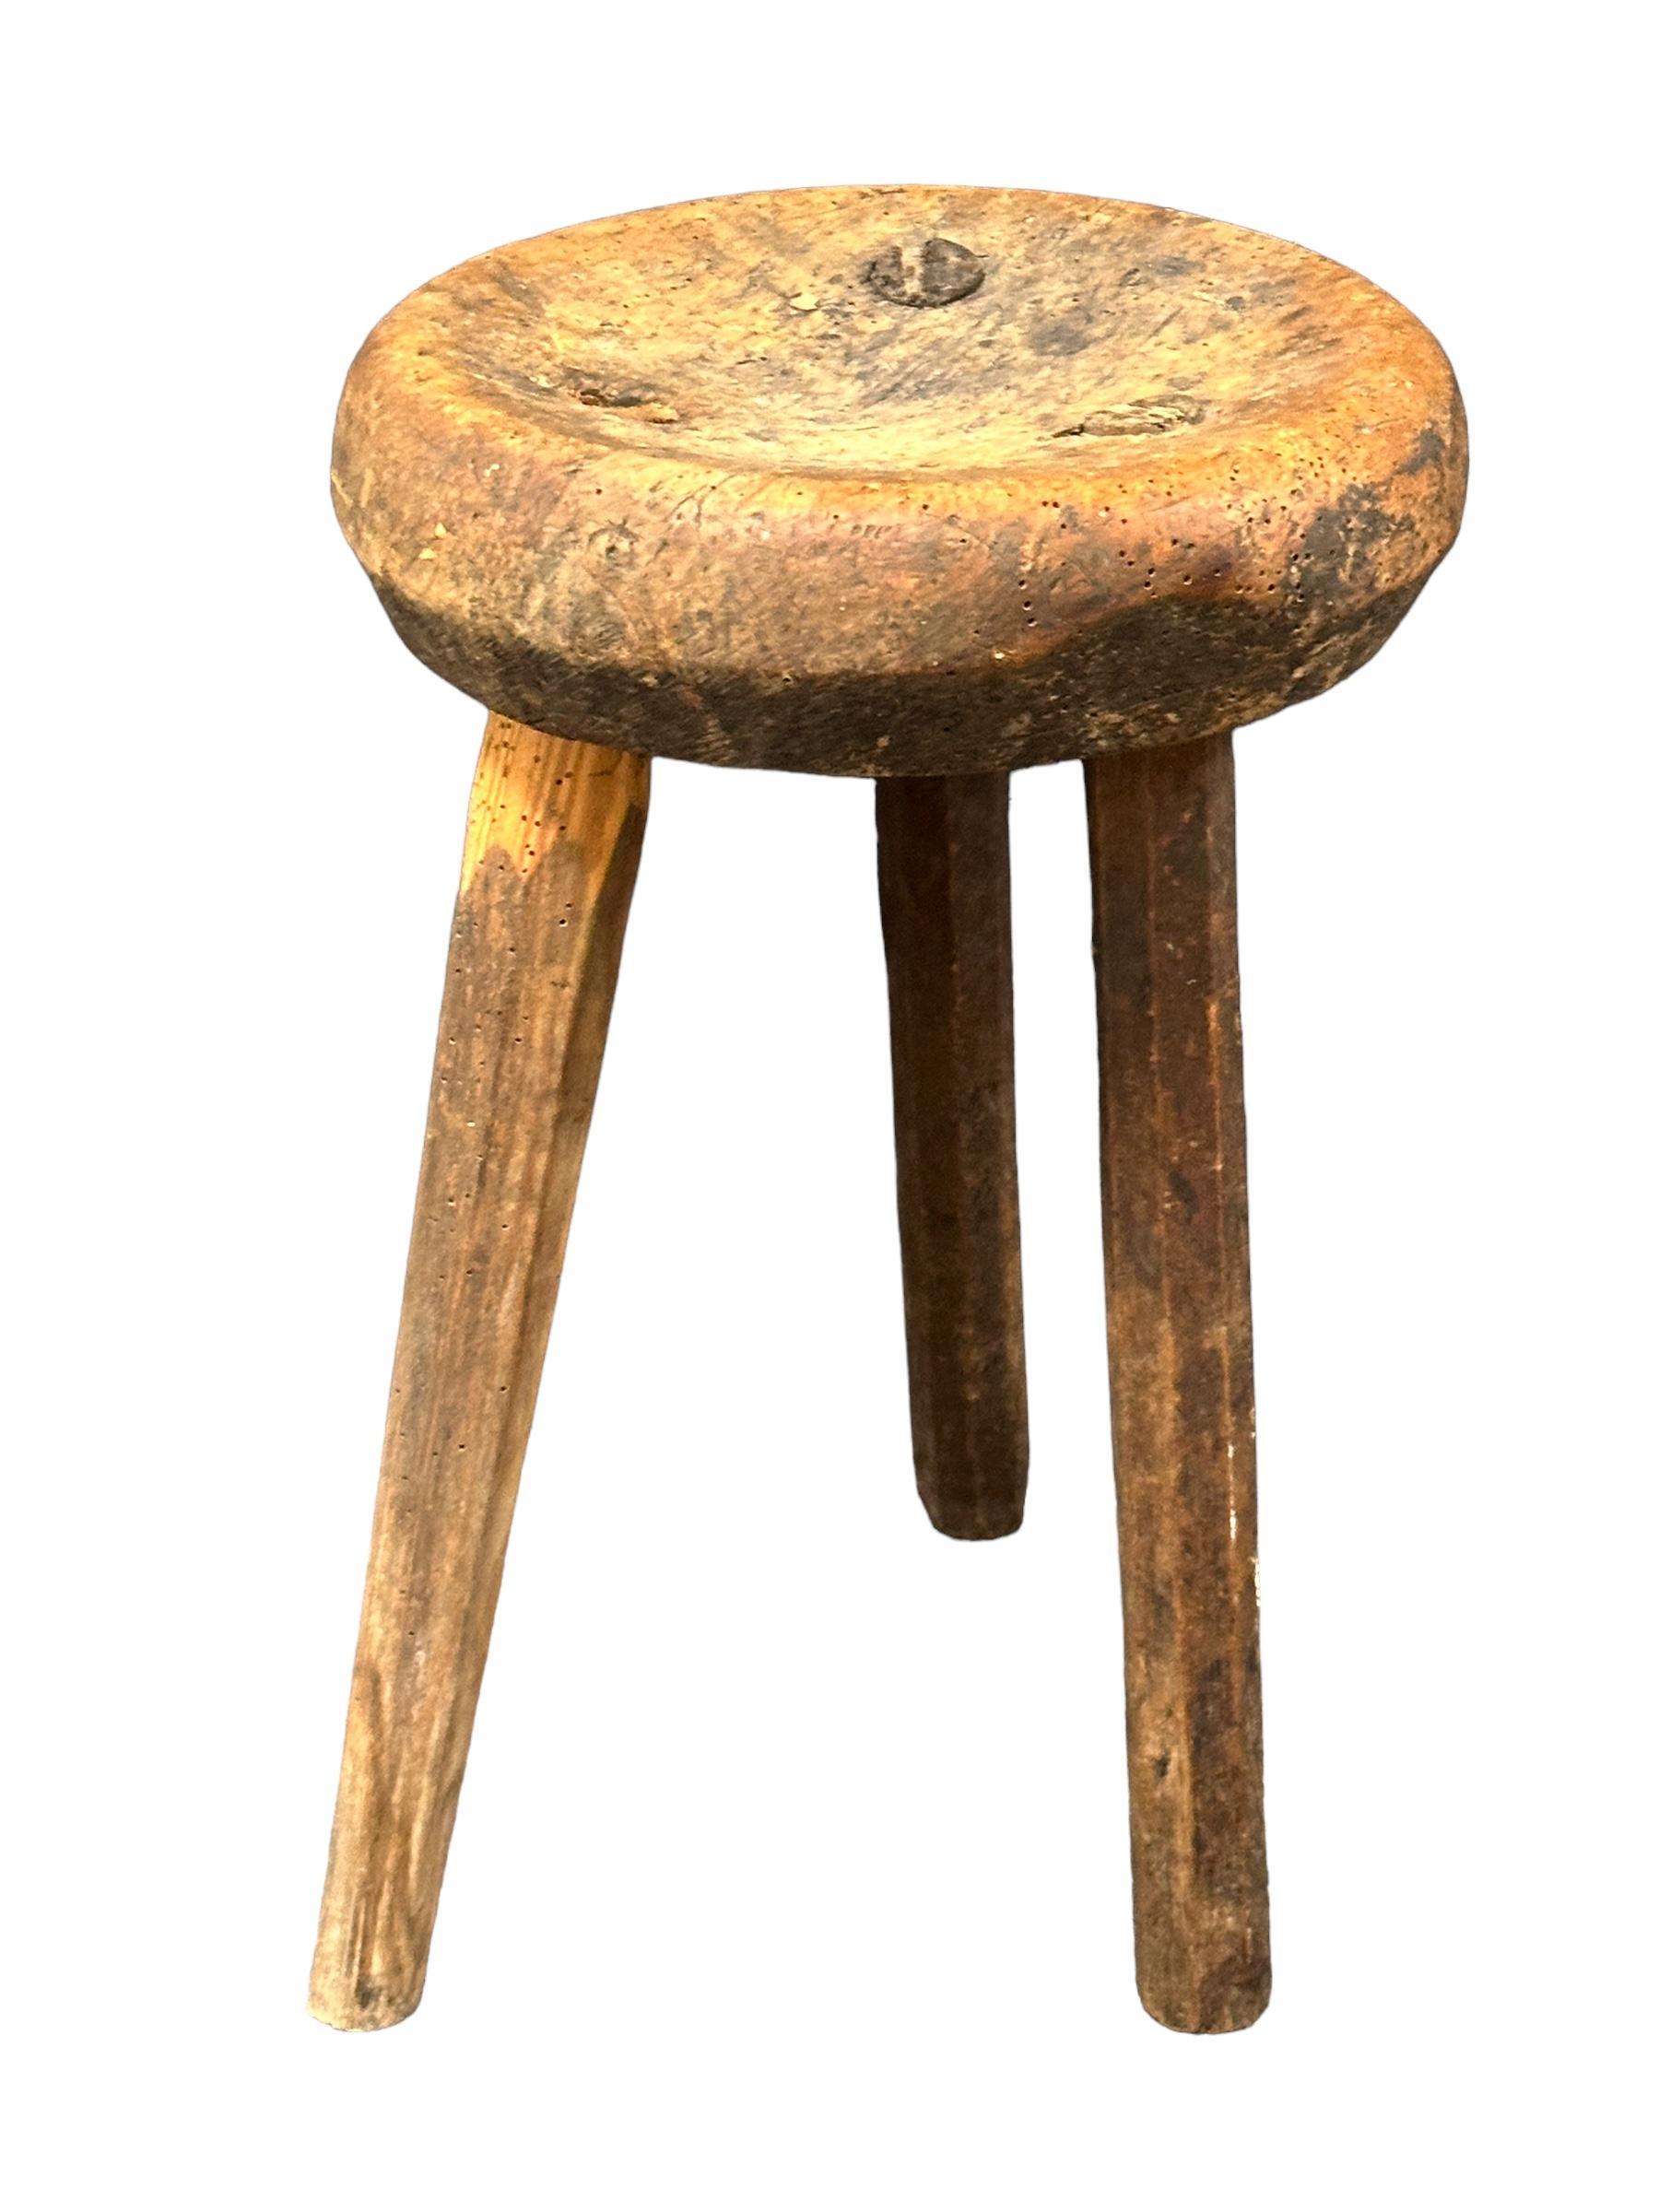 This early 20th century wabi sabi 3 leg workshop stool from Germany is an excellent example of this style. The piece has a square, rustic-looking seat made of wood and is supported by three legs. The stool has a simple, understated design which is